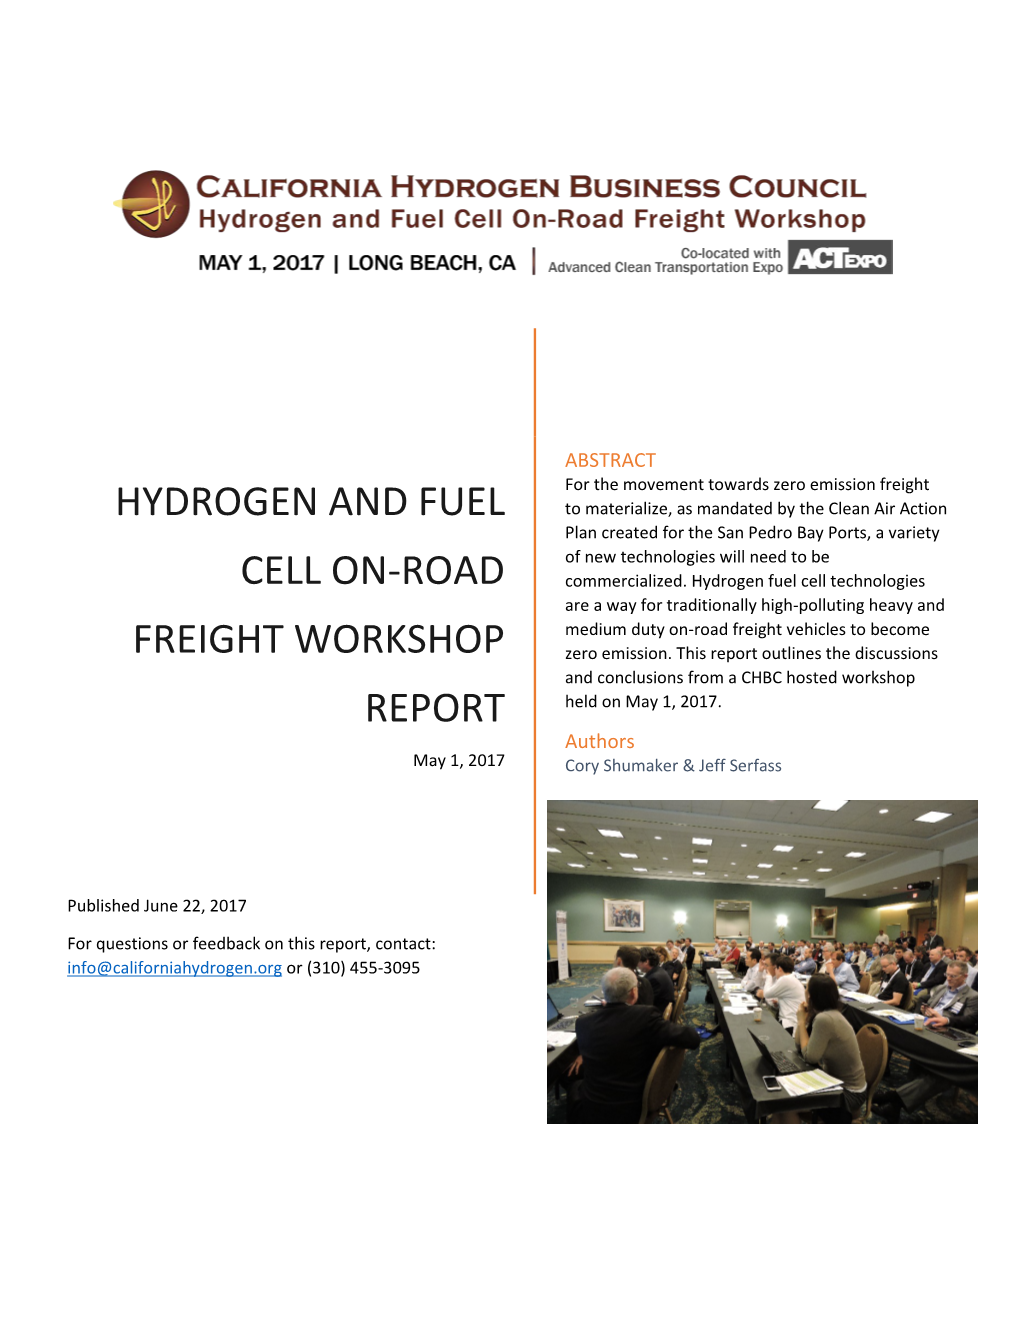 Hydrogen and Fuel Cell On-Road Freight Workshop Report